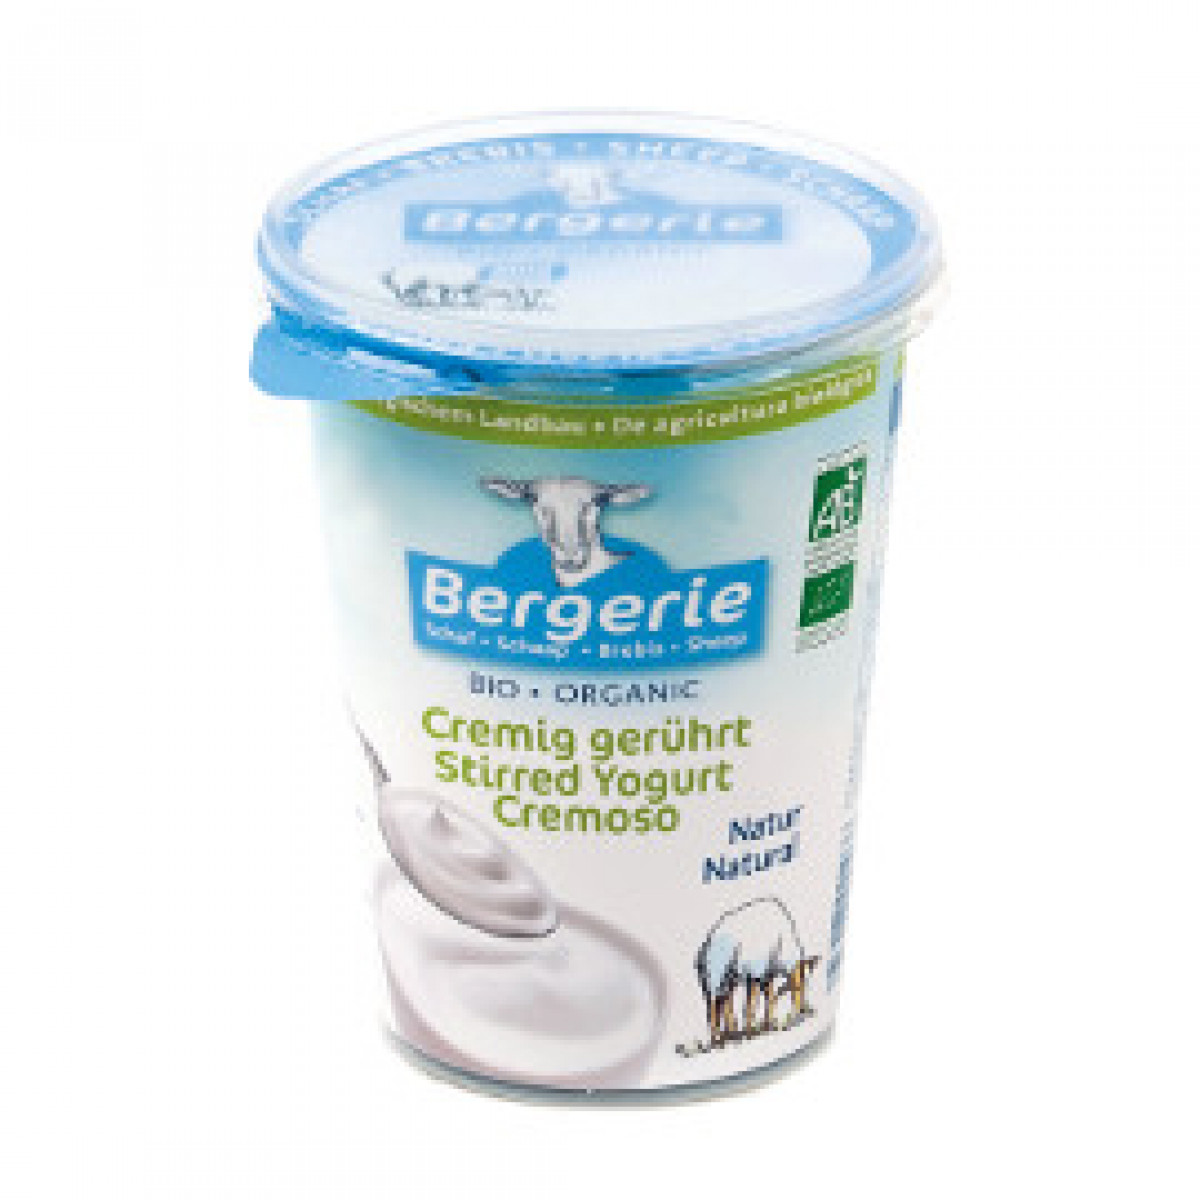 Product picture for Sheep's Yogurt - Natural Stirred